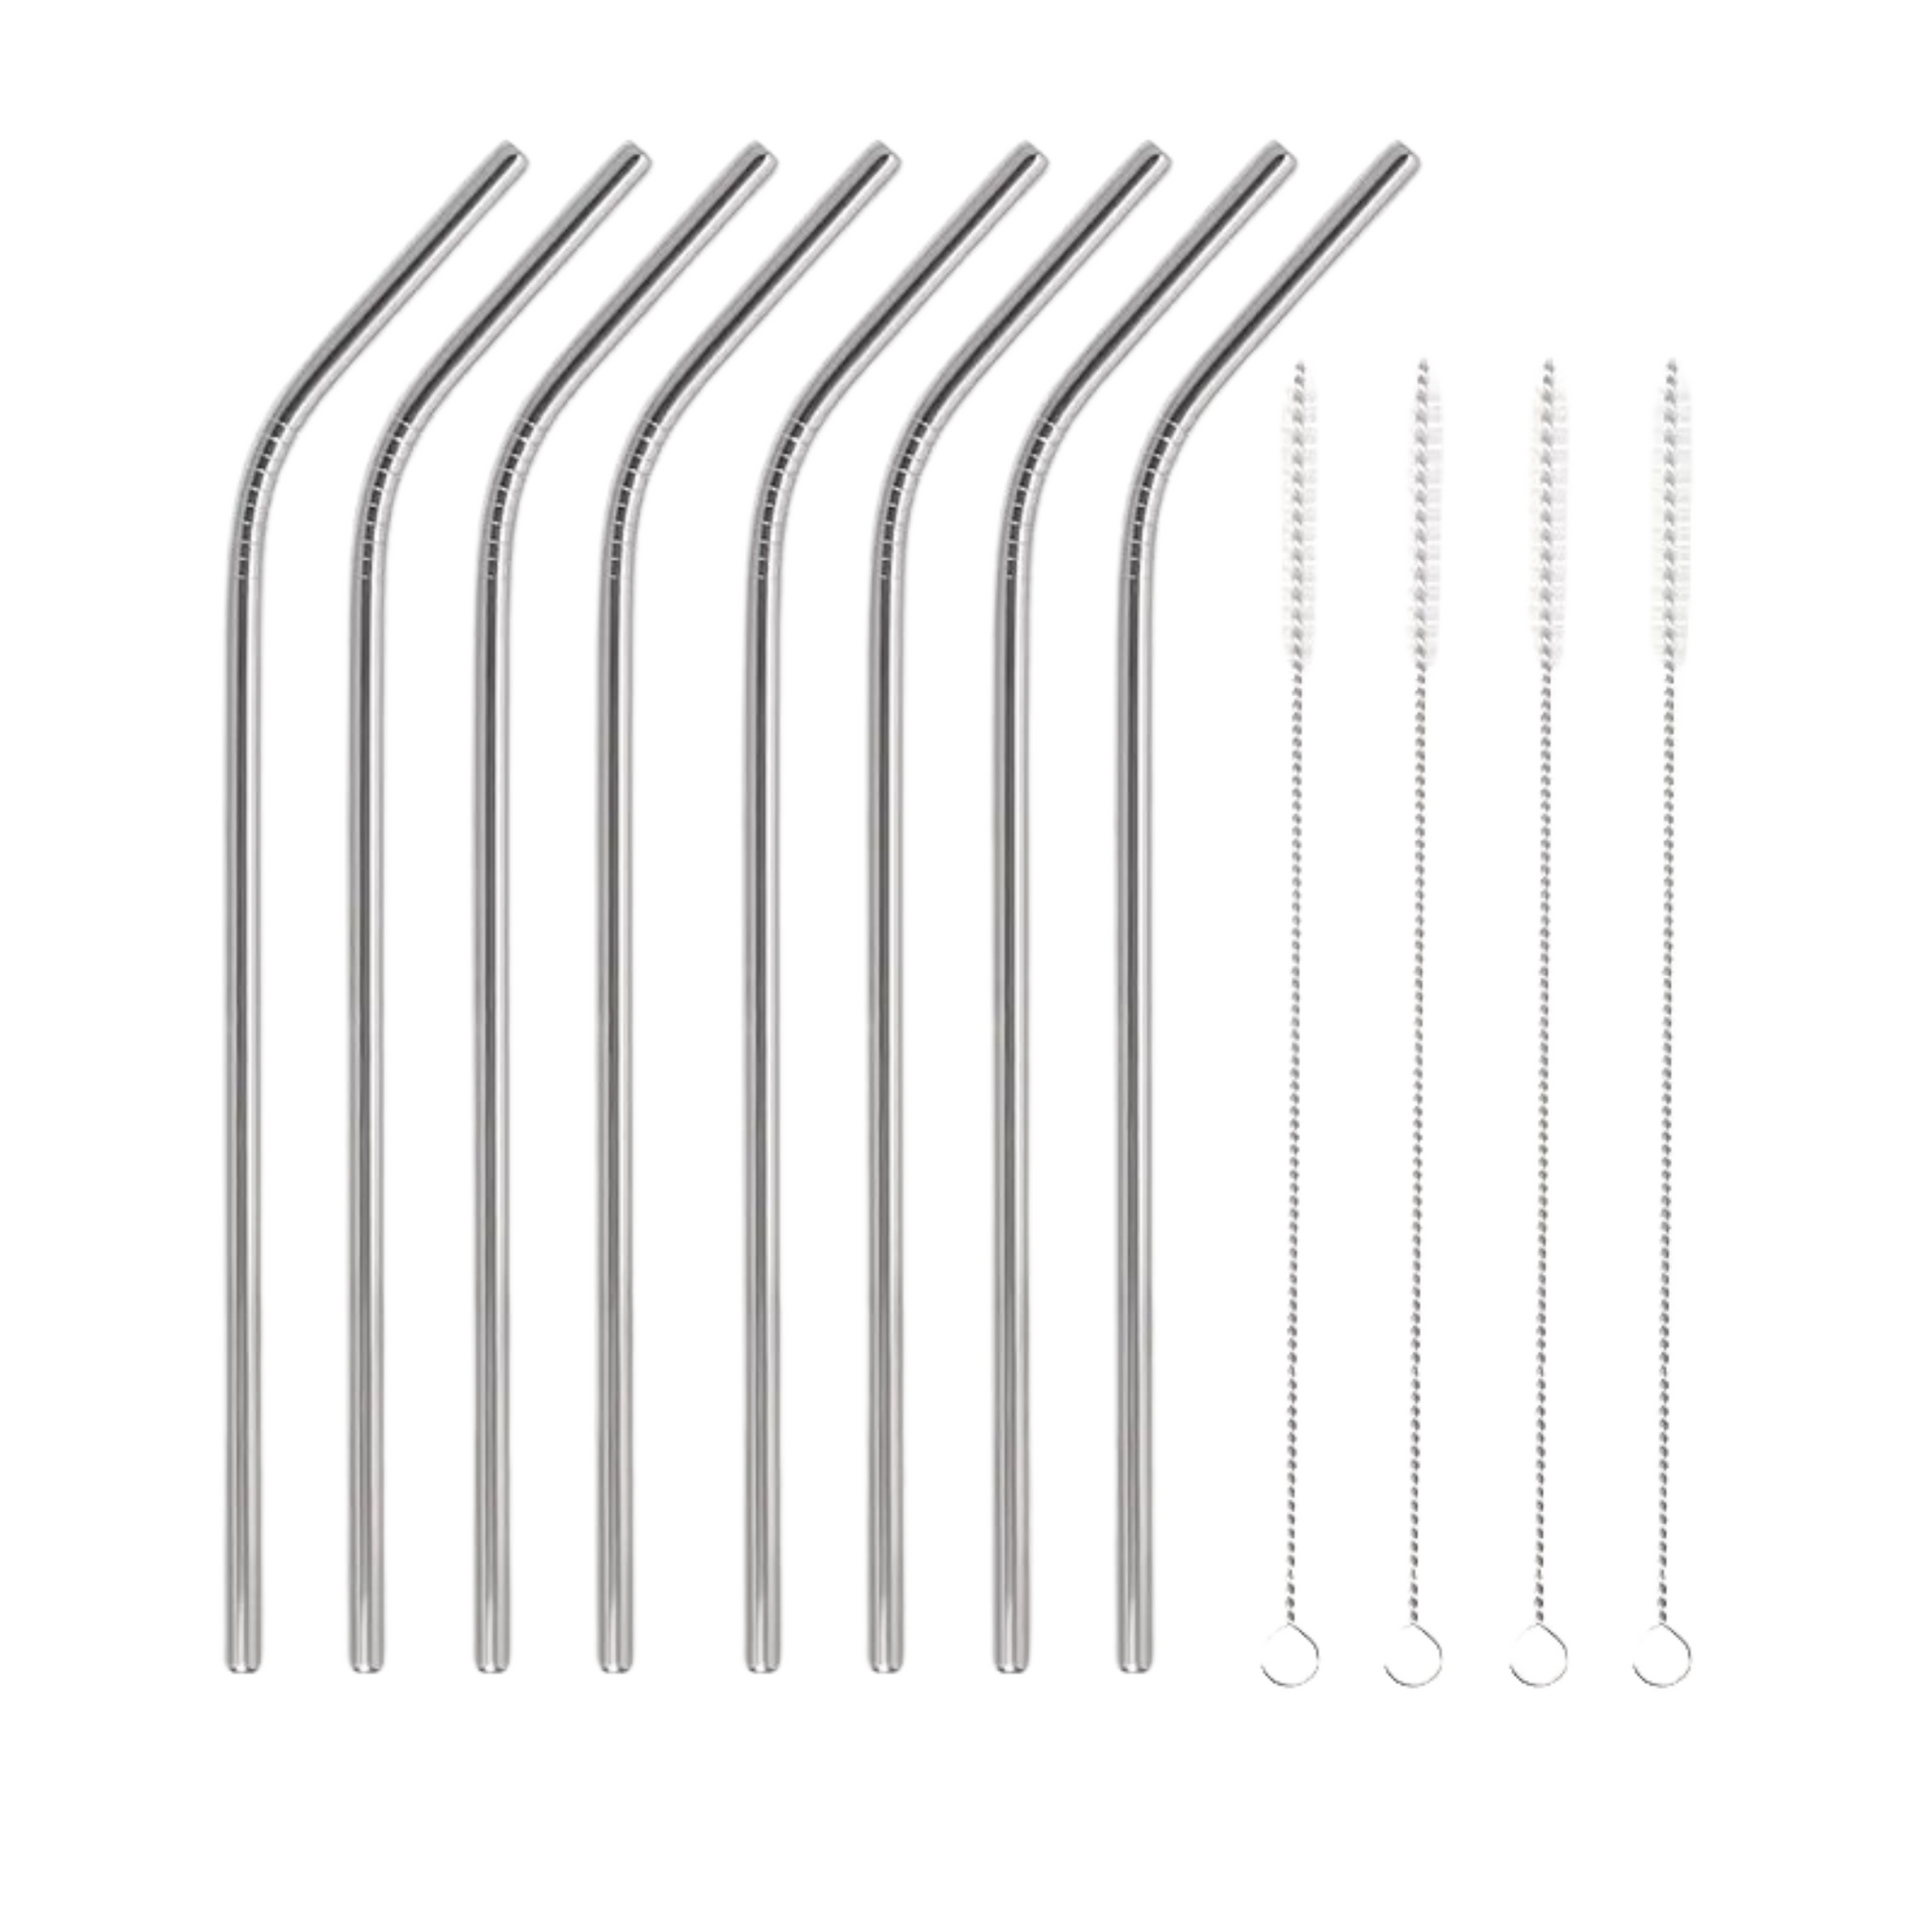  8 silver bent Stainless Steel Reusable Straws Set with Brush